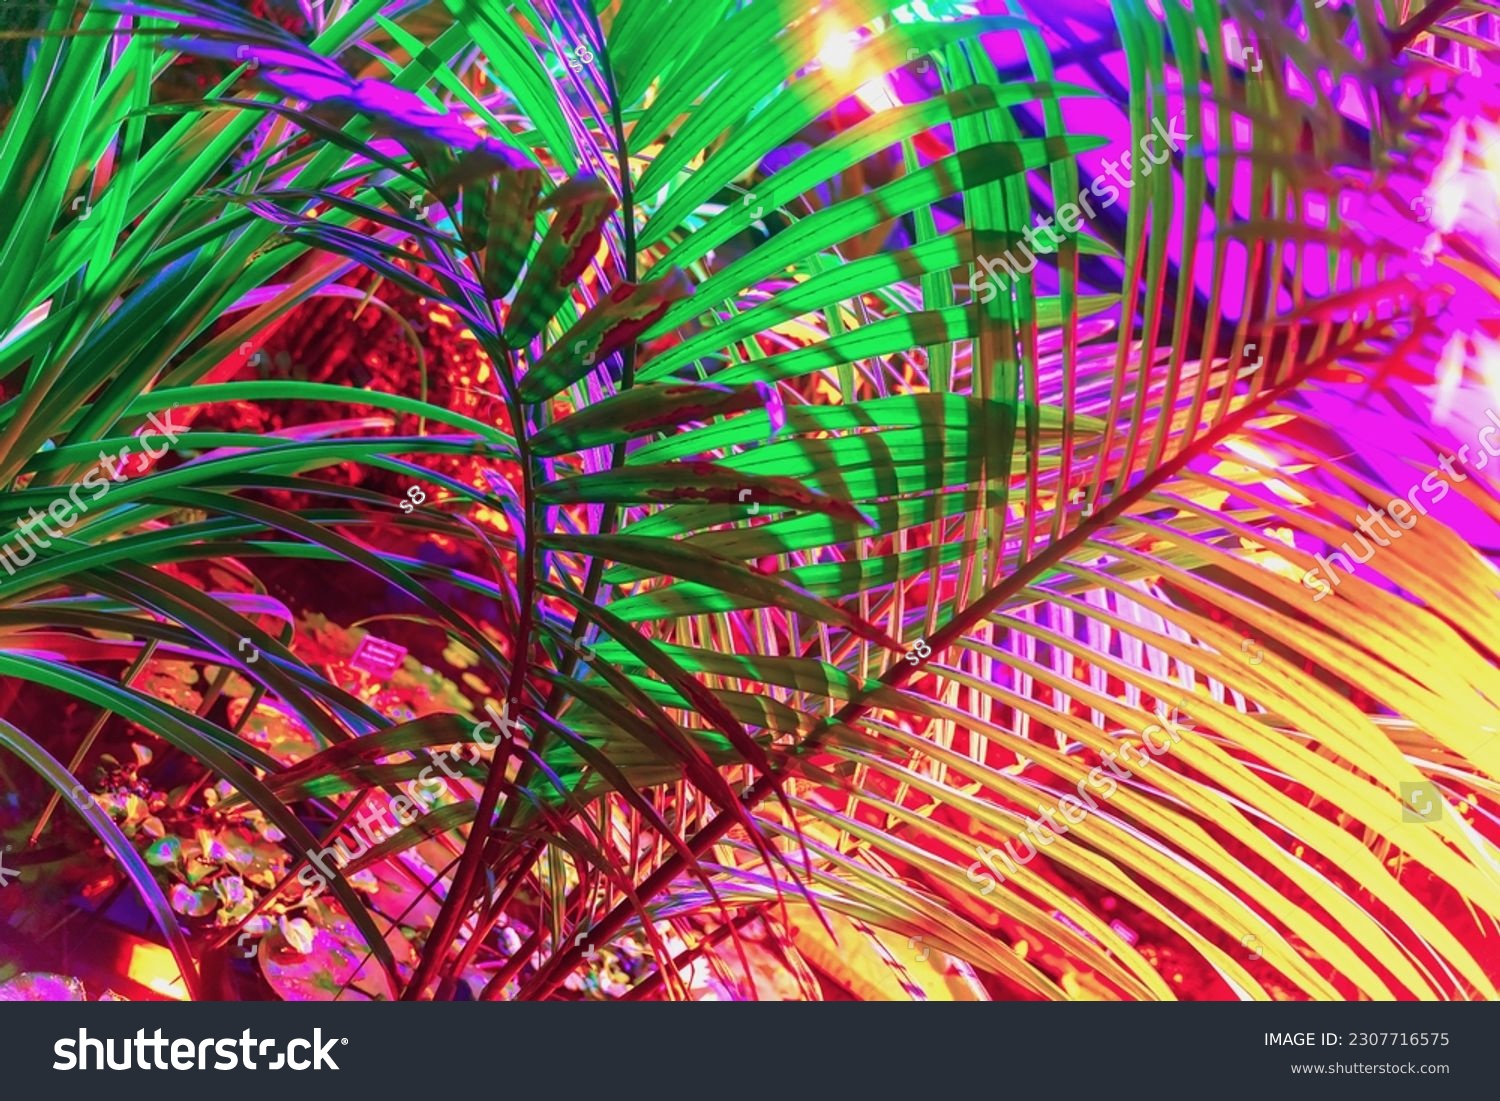 Tropical natural palm tree branches close-up, fashionable neon colors. Natural texture, exotic jungle, abstract botanical background #2307716575